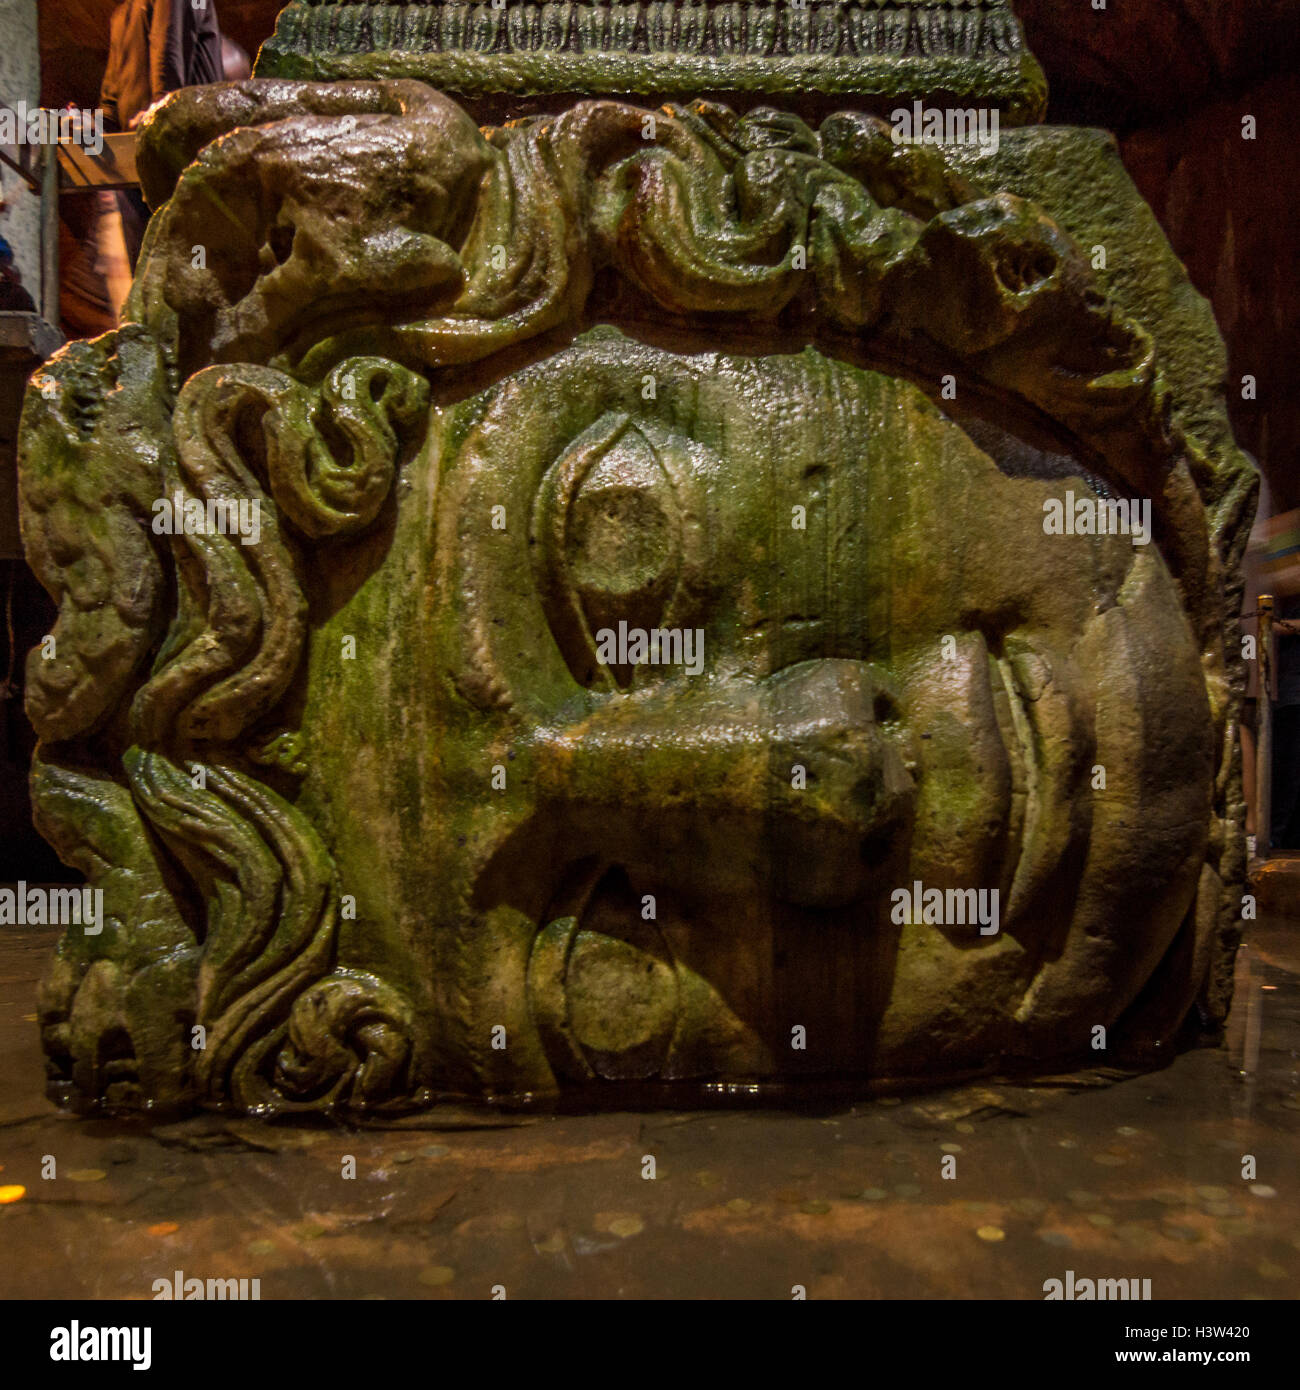 One of the two Medusa head statues located in the Northwest corner of the Basilica Cistern (at the base of two of the columns), Stock Photo